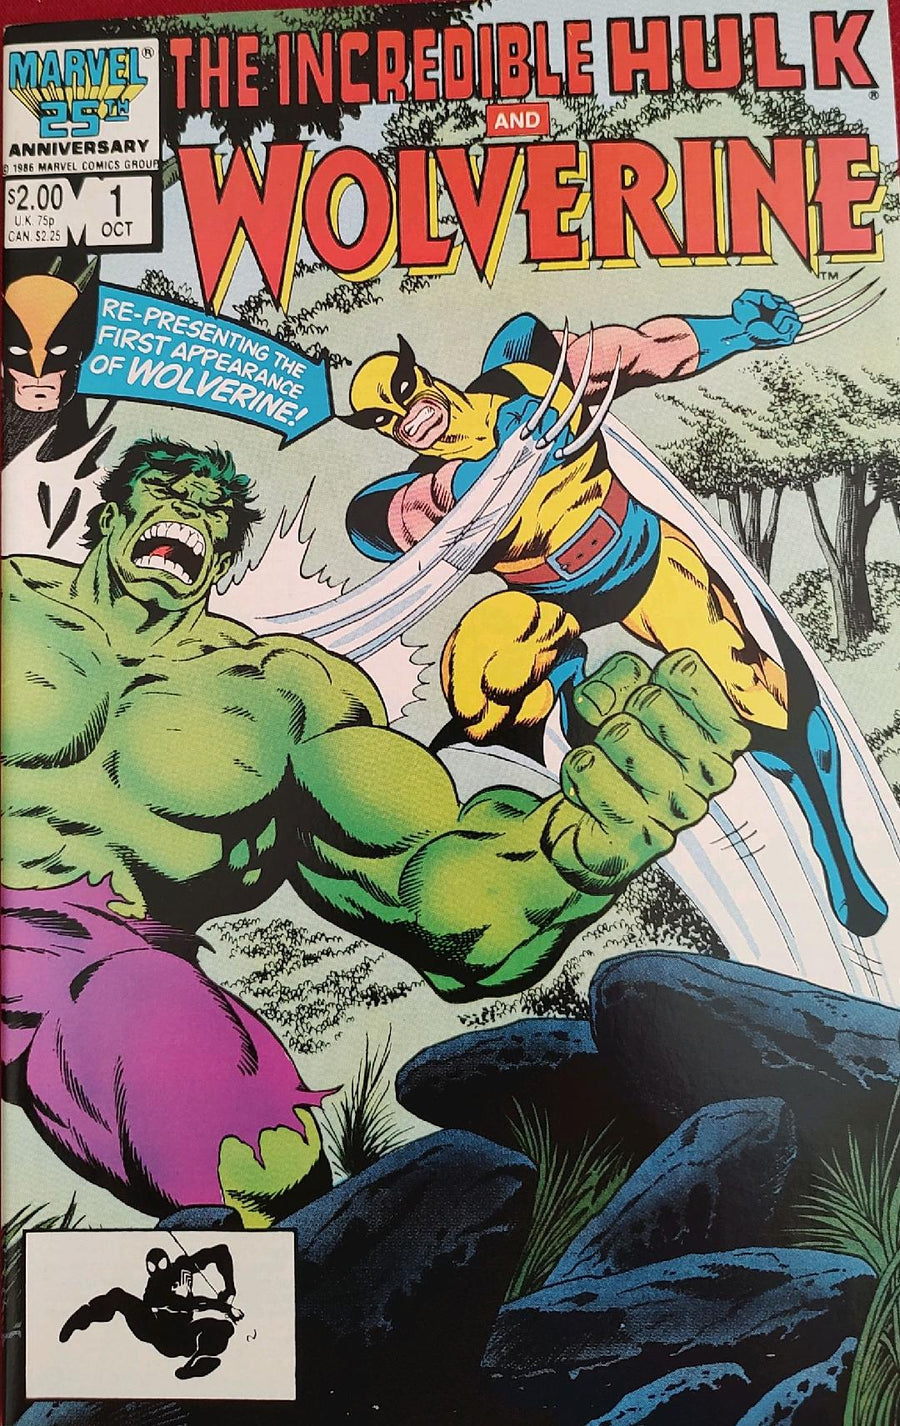 The Incredible Hulk and Wolverine Comic Book Cover